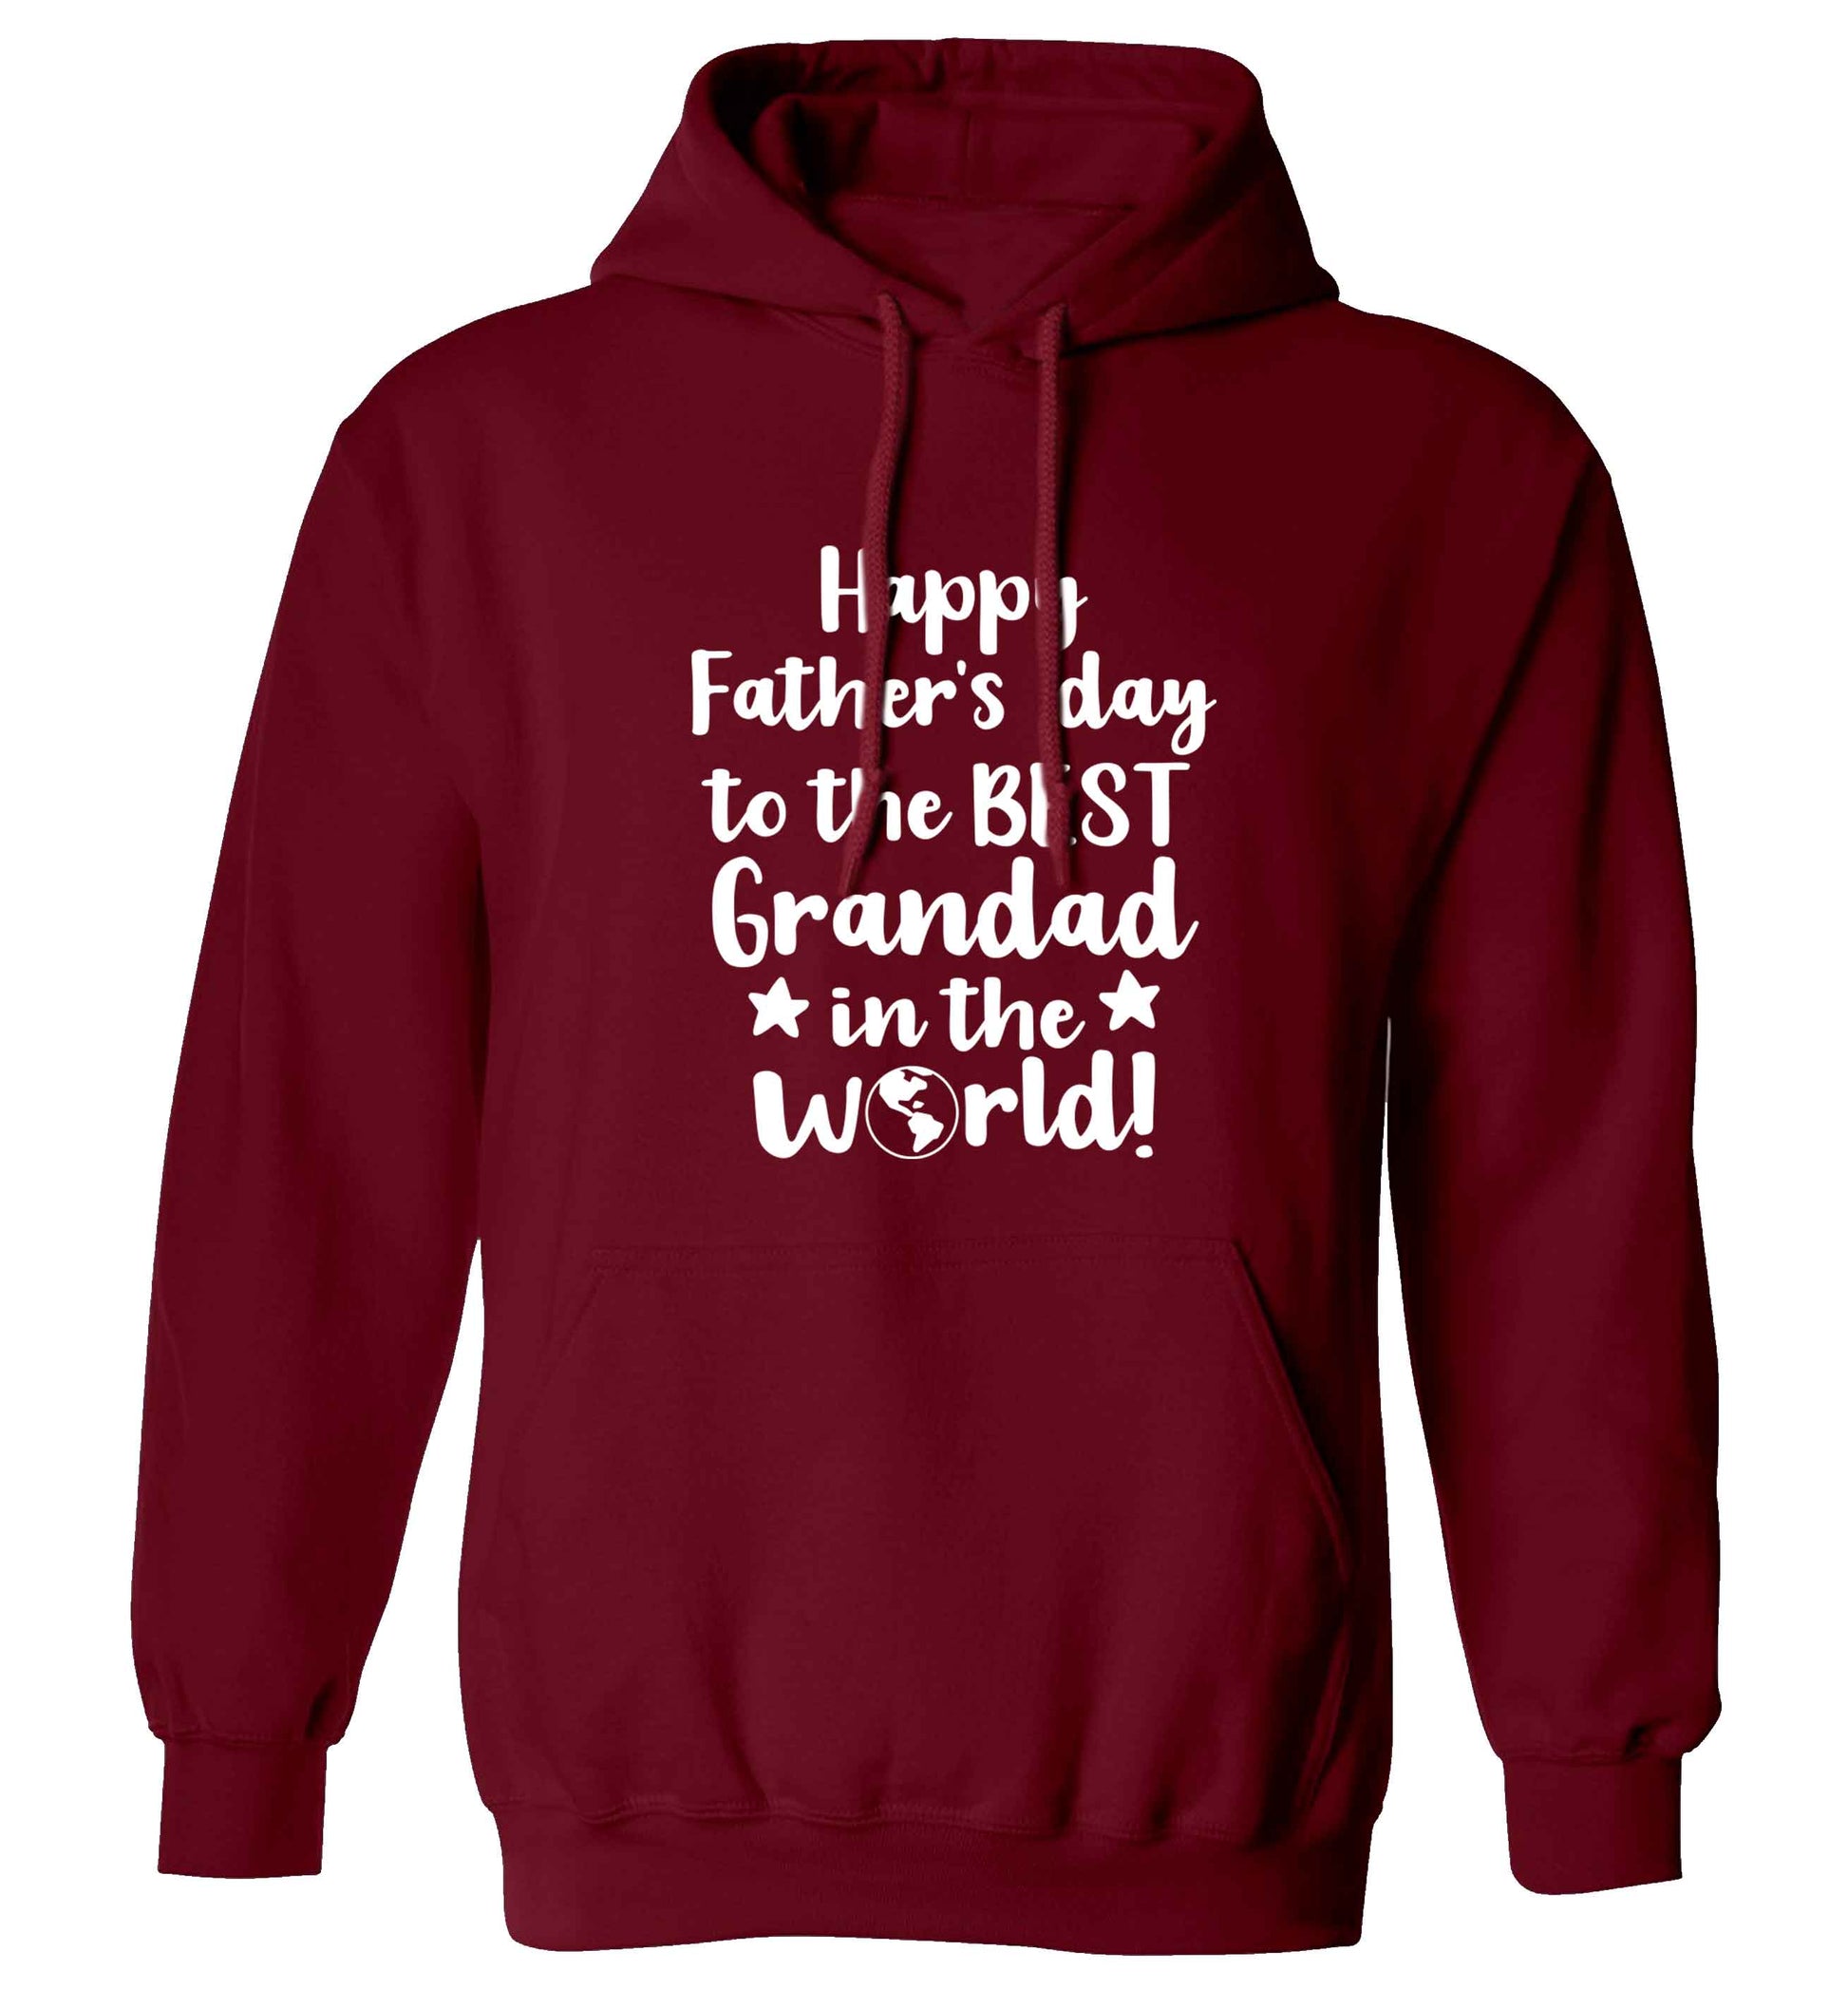 Happy Father's day to the best grandad in the world adults unisex maroon hoodie 2XL